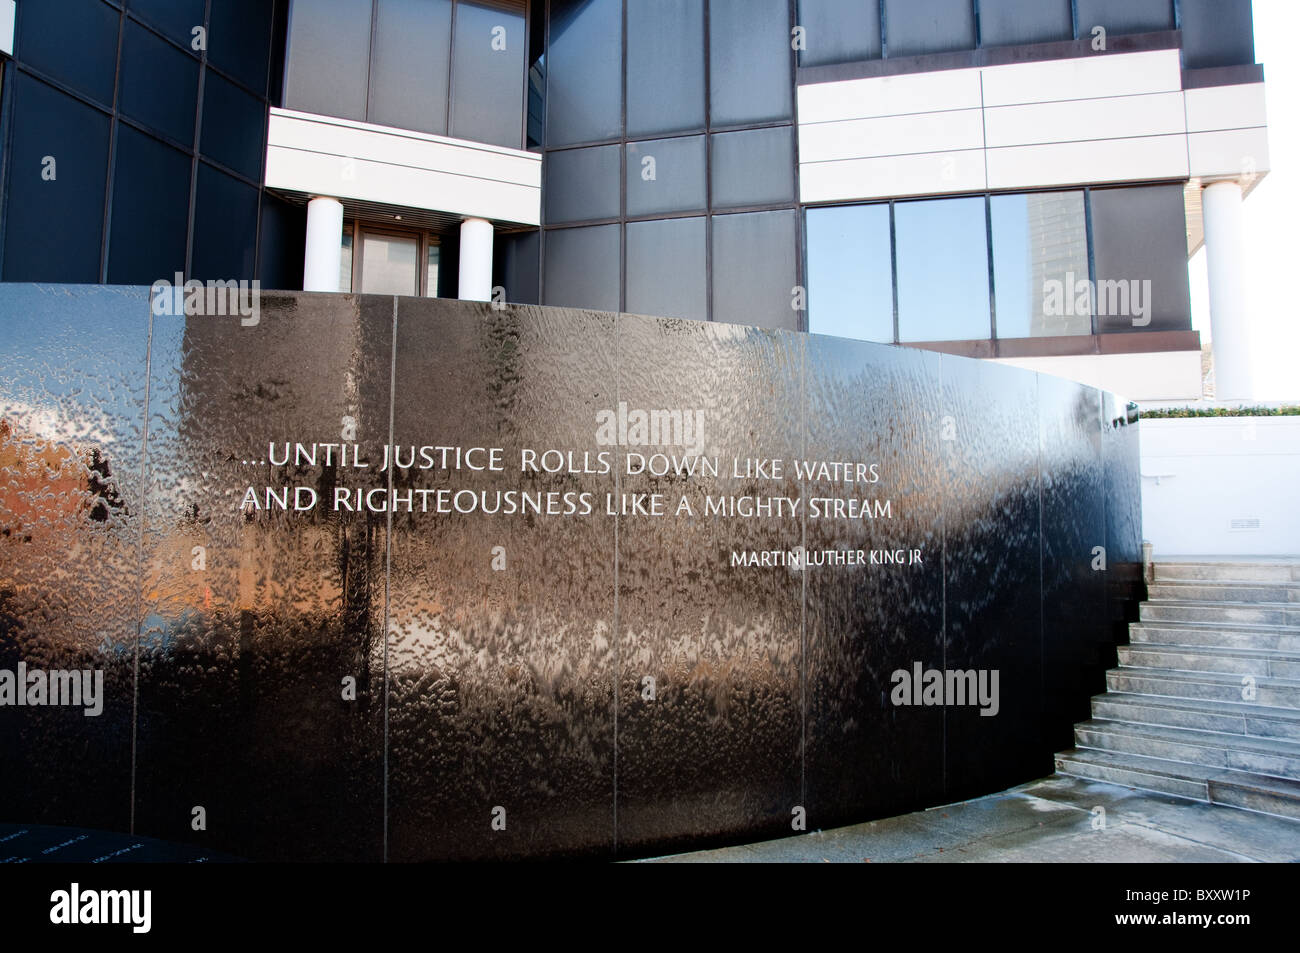 Civil Rights Memorial and Museum in Montgomery, Alabama, United States. Stock Photo